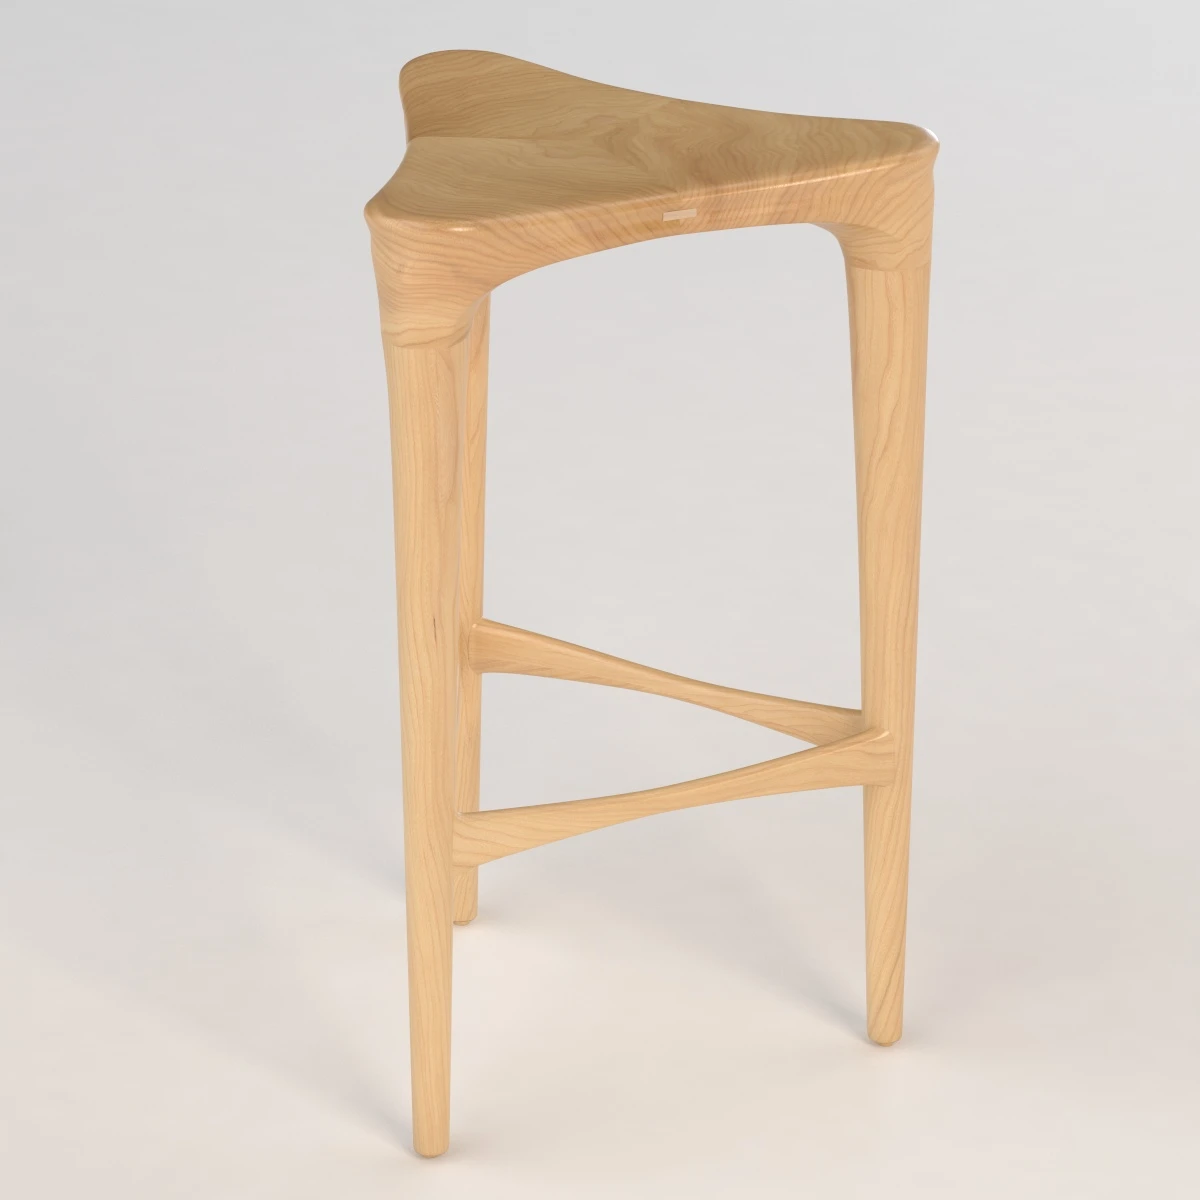 2 By 3 Wood Stools Geiger 3D Model_07